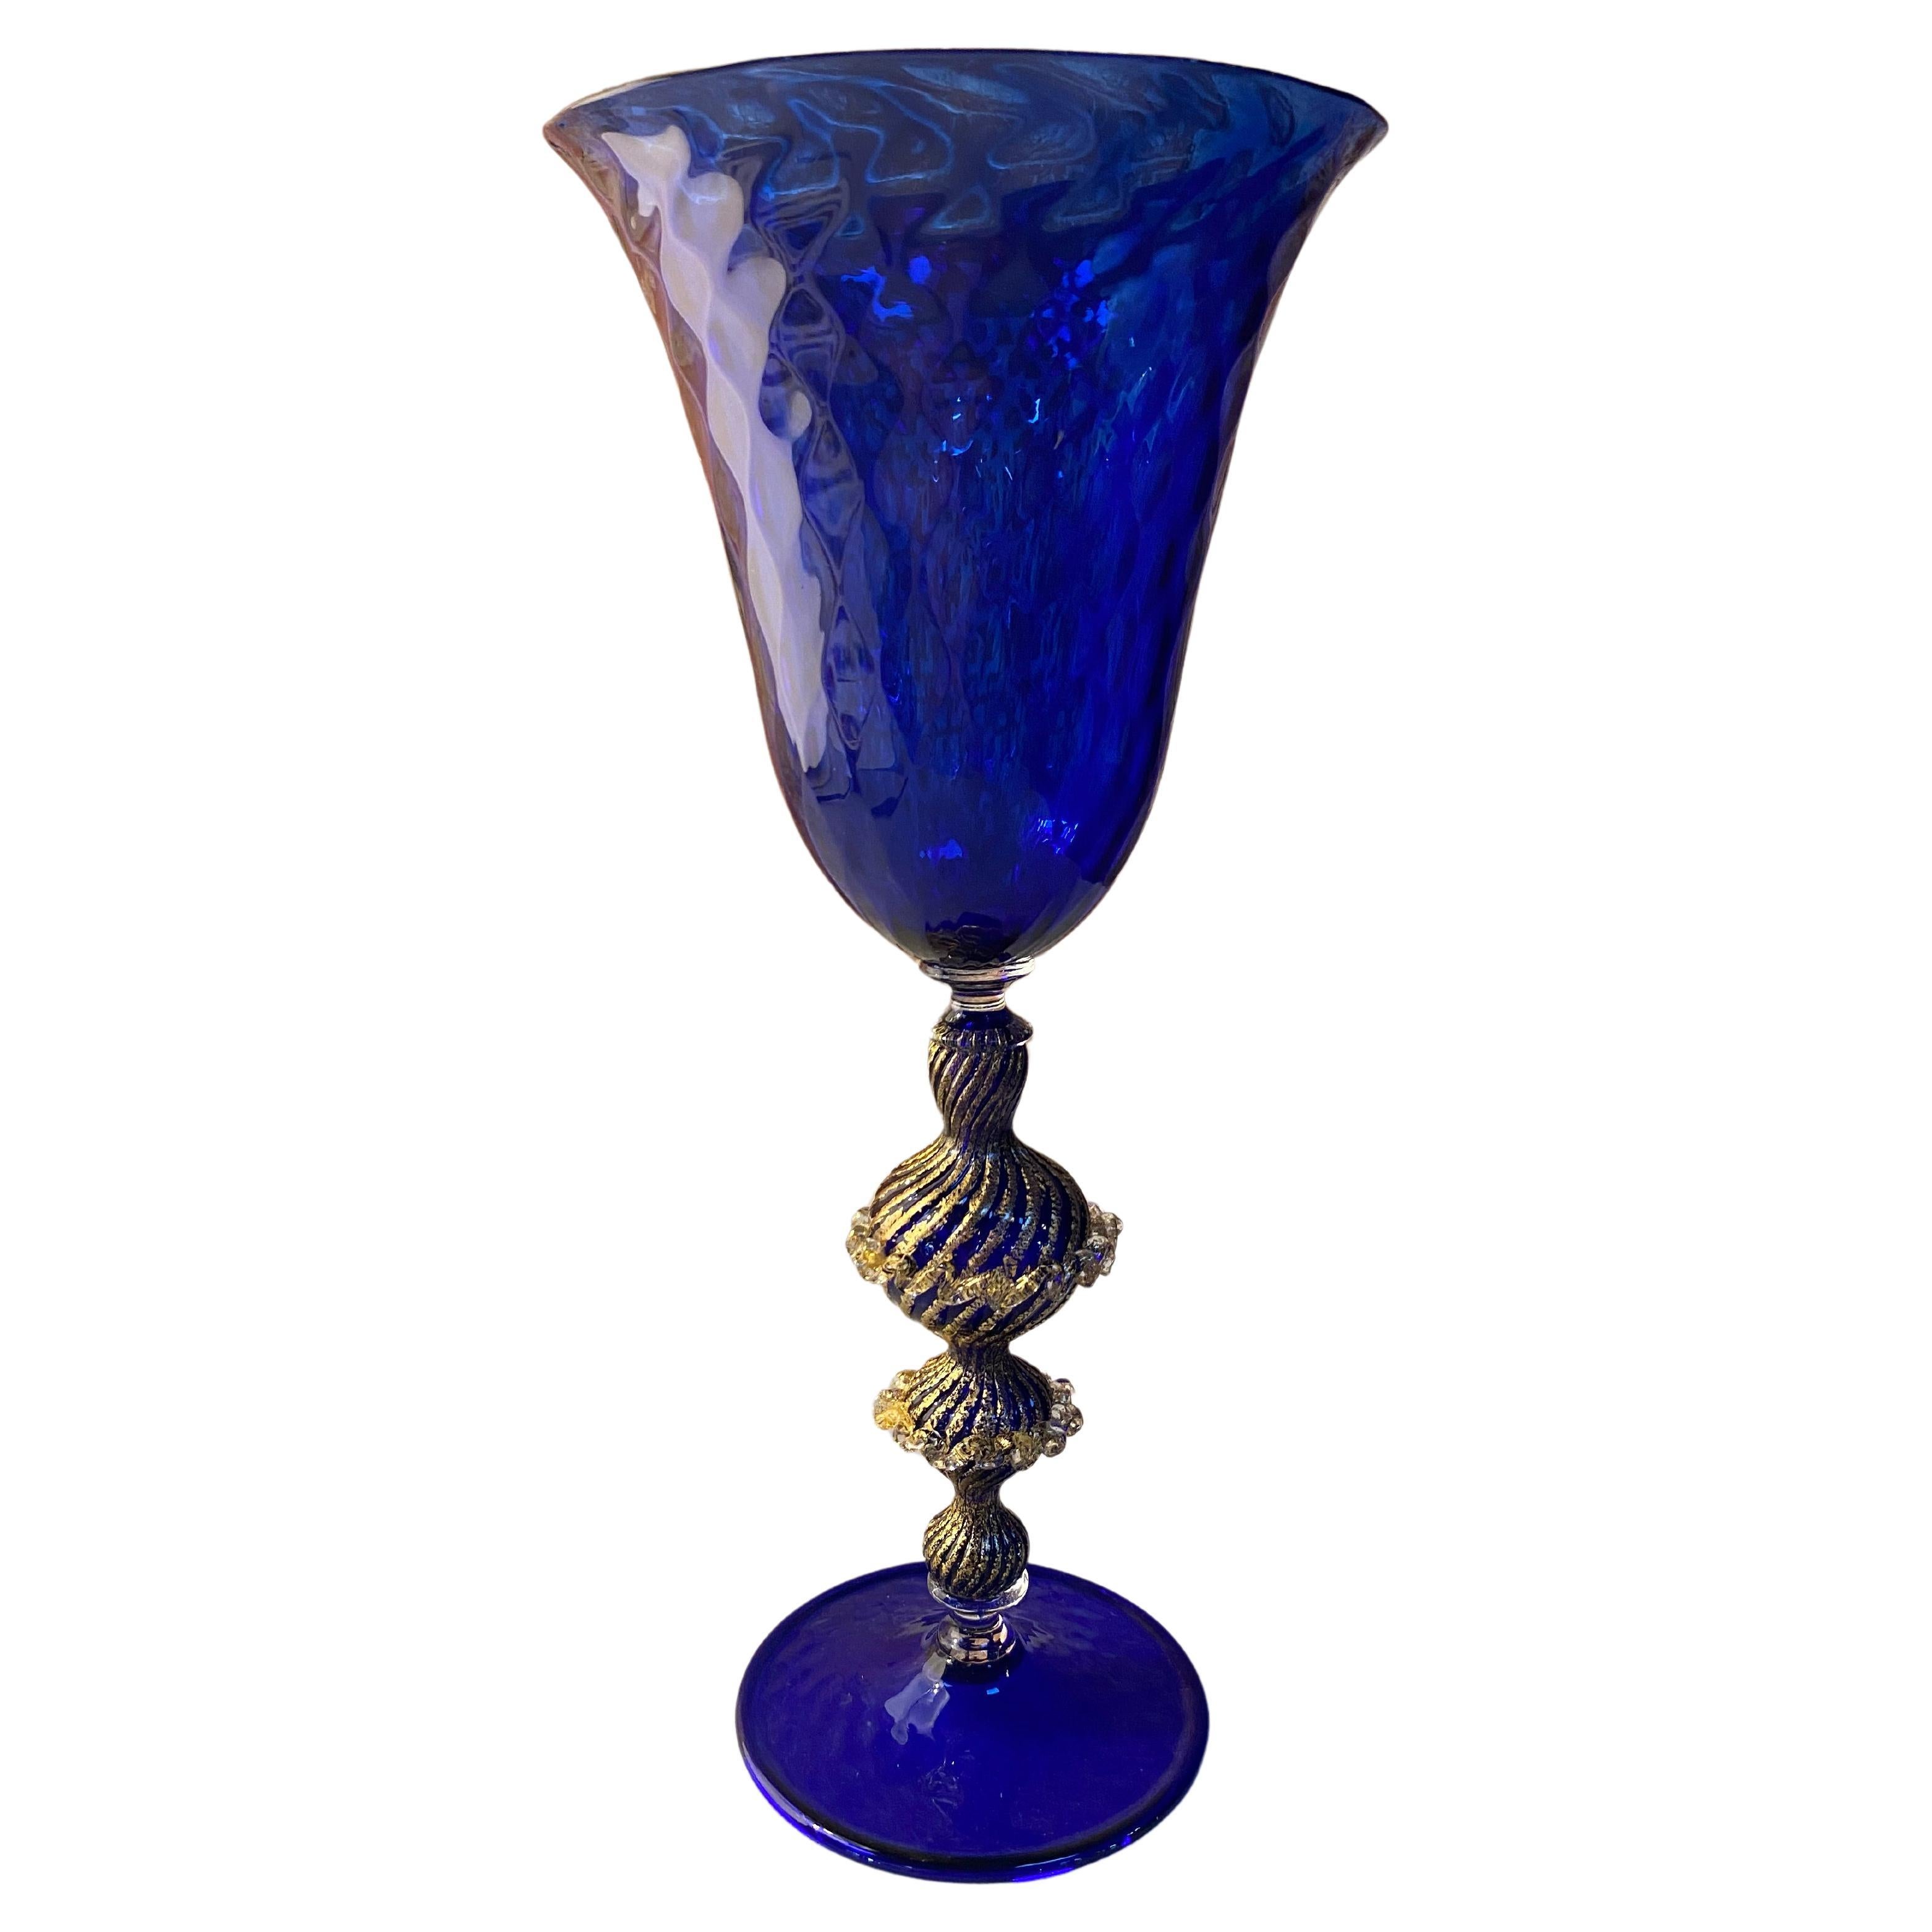 Vintage Blue Italian Handcrafted Chalice, 1970s